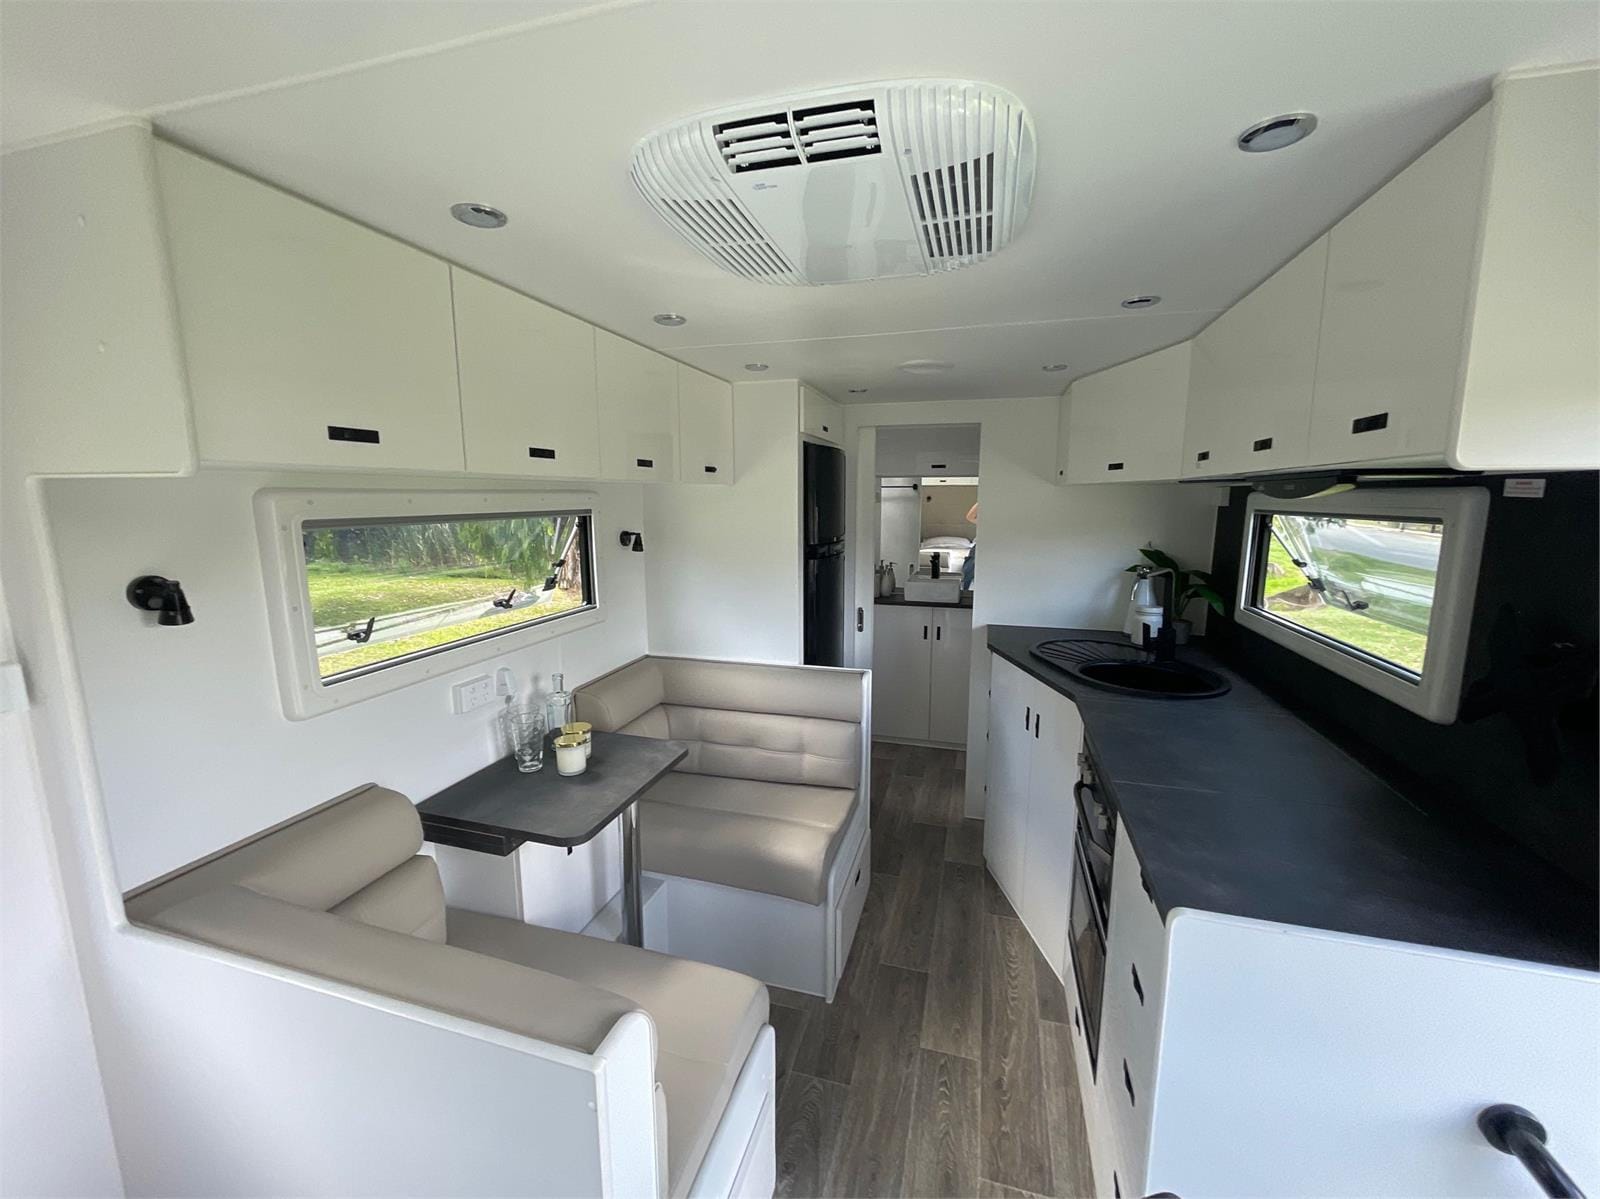 2022 Network 19'6 ANGLED KITCHEN OFFROAD FOR SALE - MitchMarket